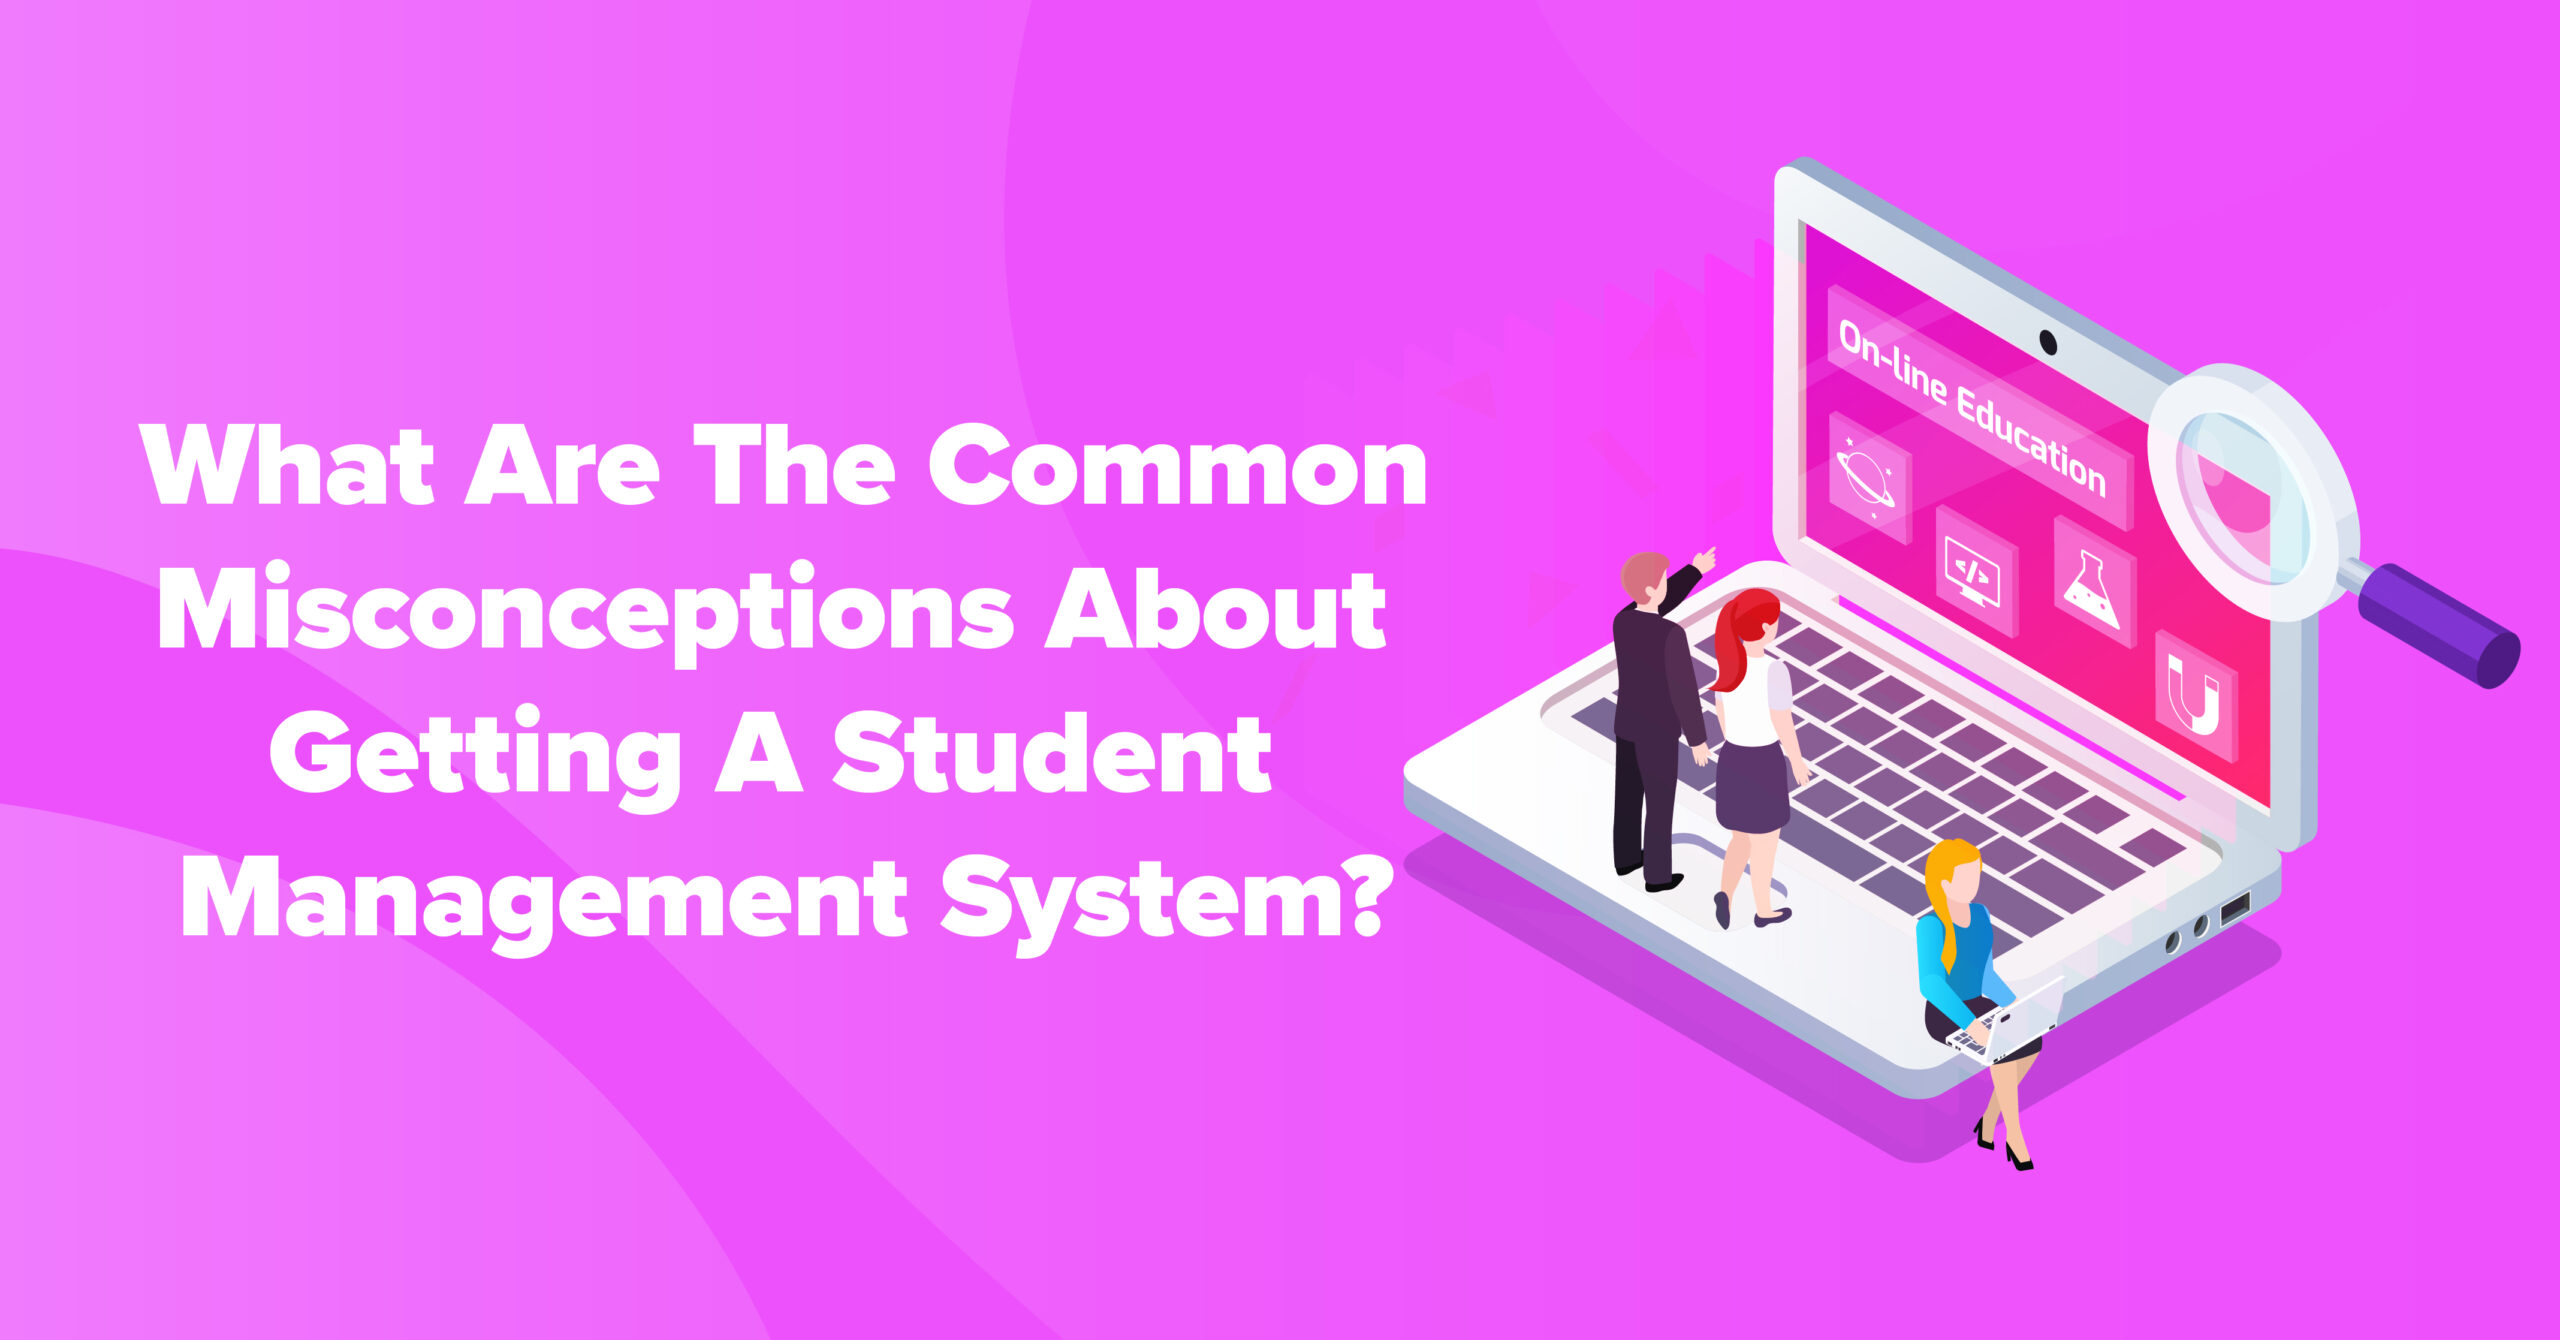 What Are the Common Misconceptions About Getting a Student Management System?